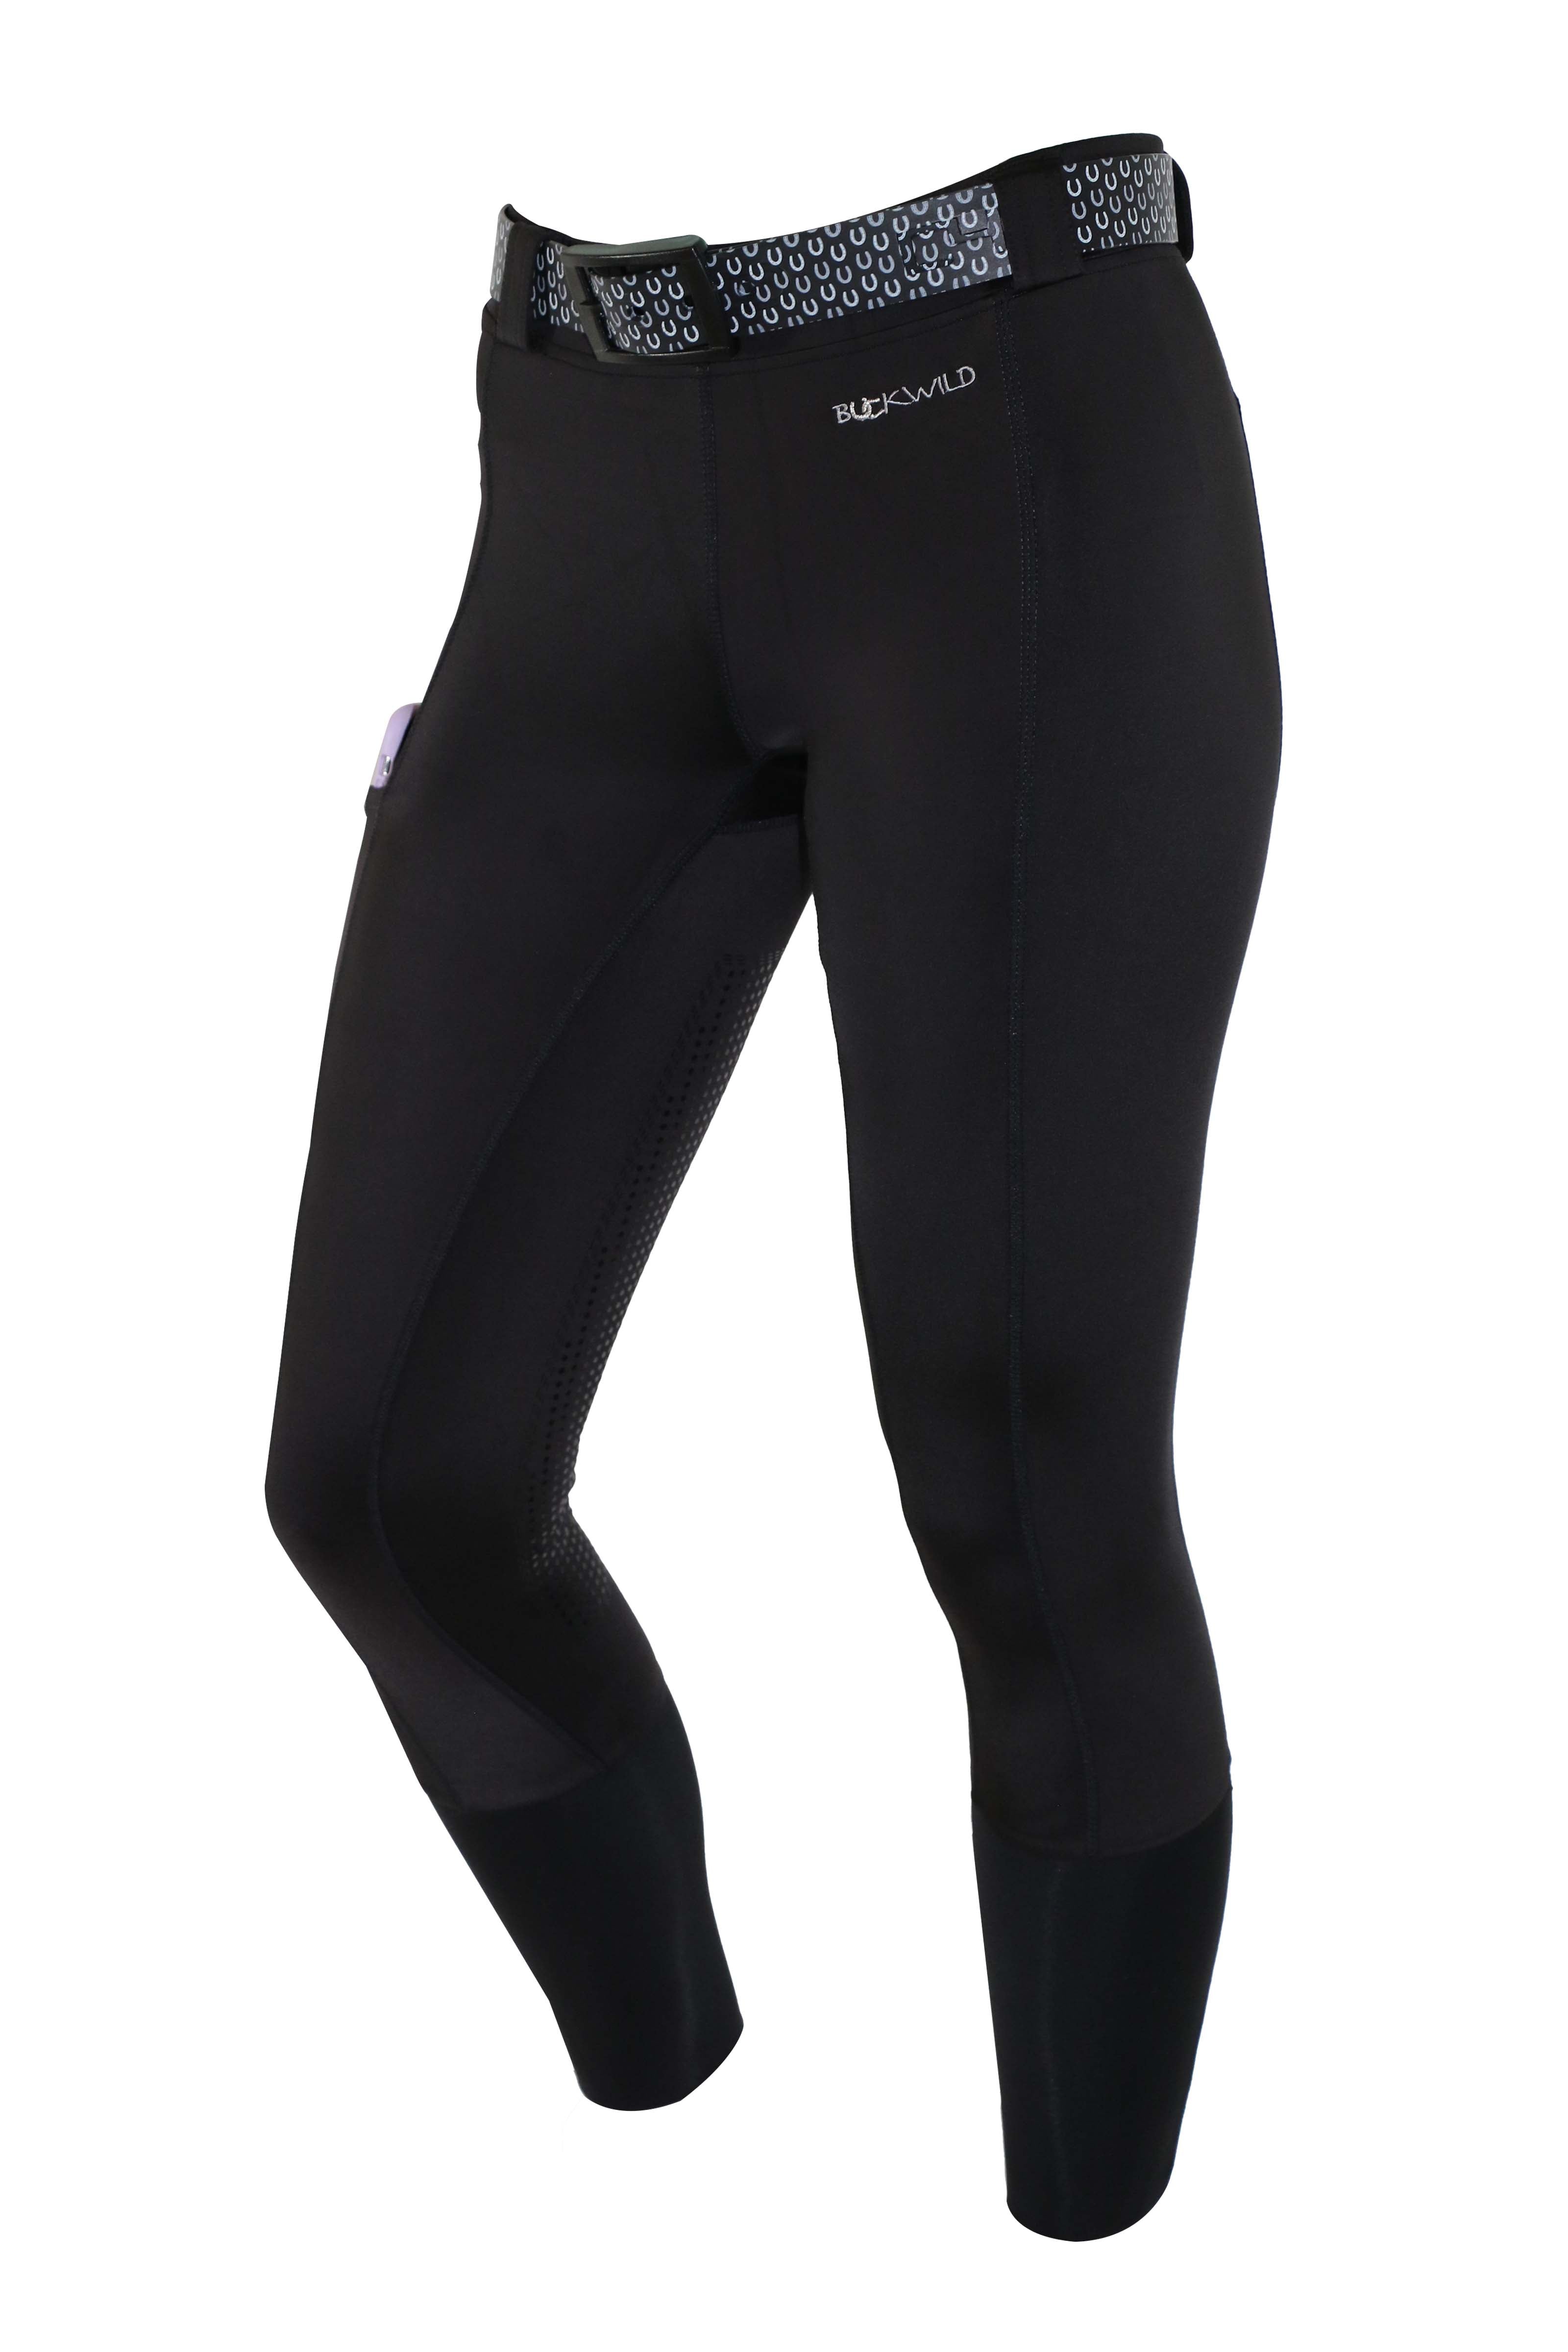 Buckwild Horse Riding Tights with Side Pocket for Technology | Black –  Buckwild Breeches